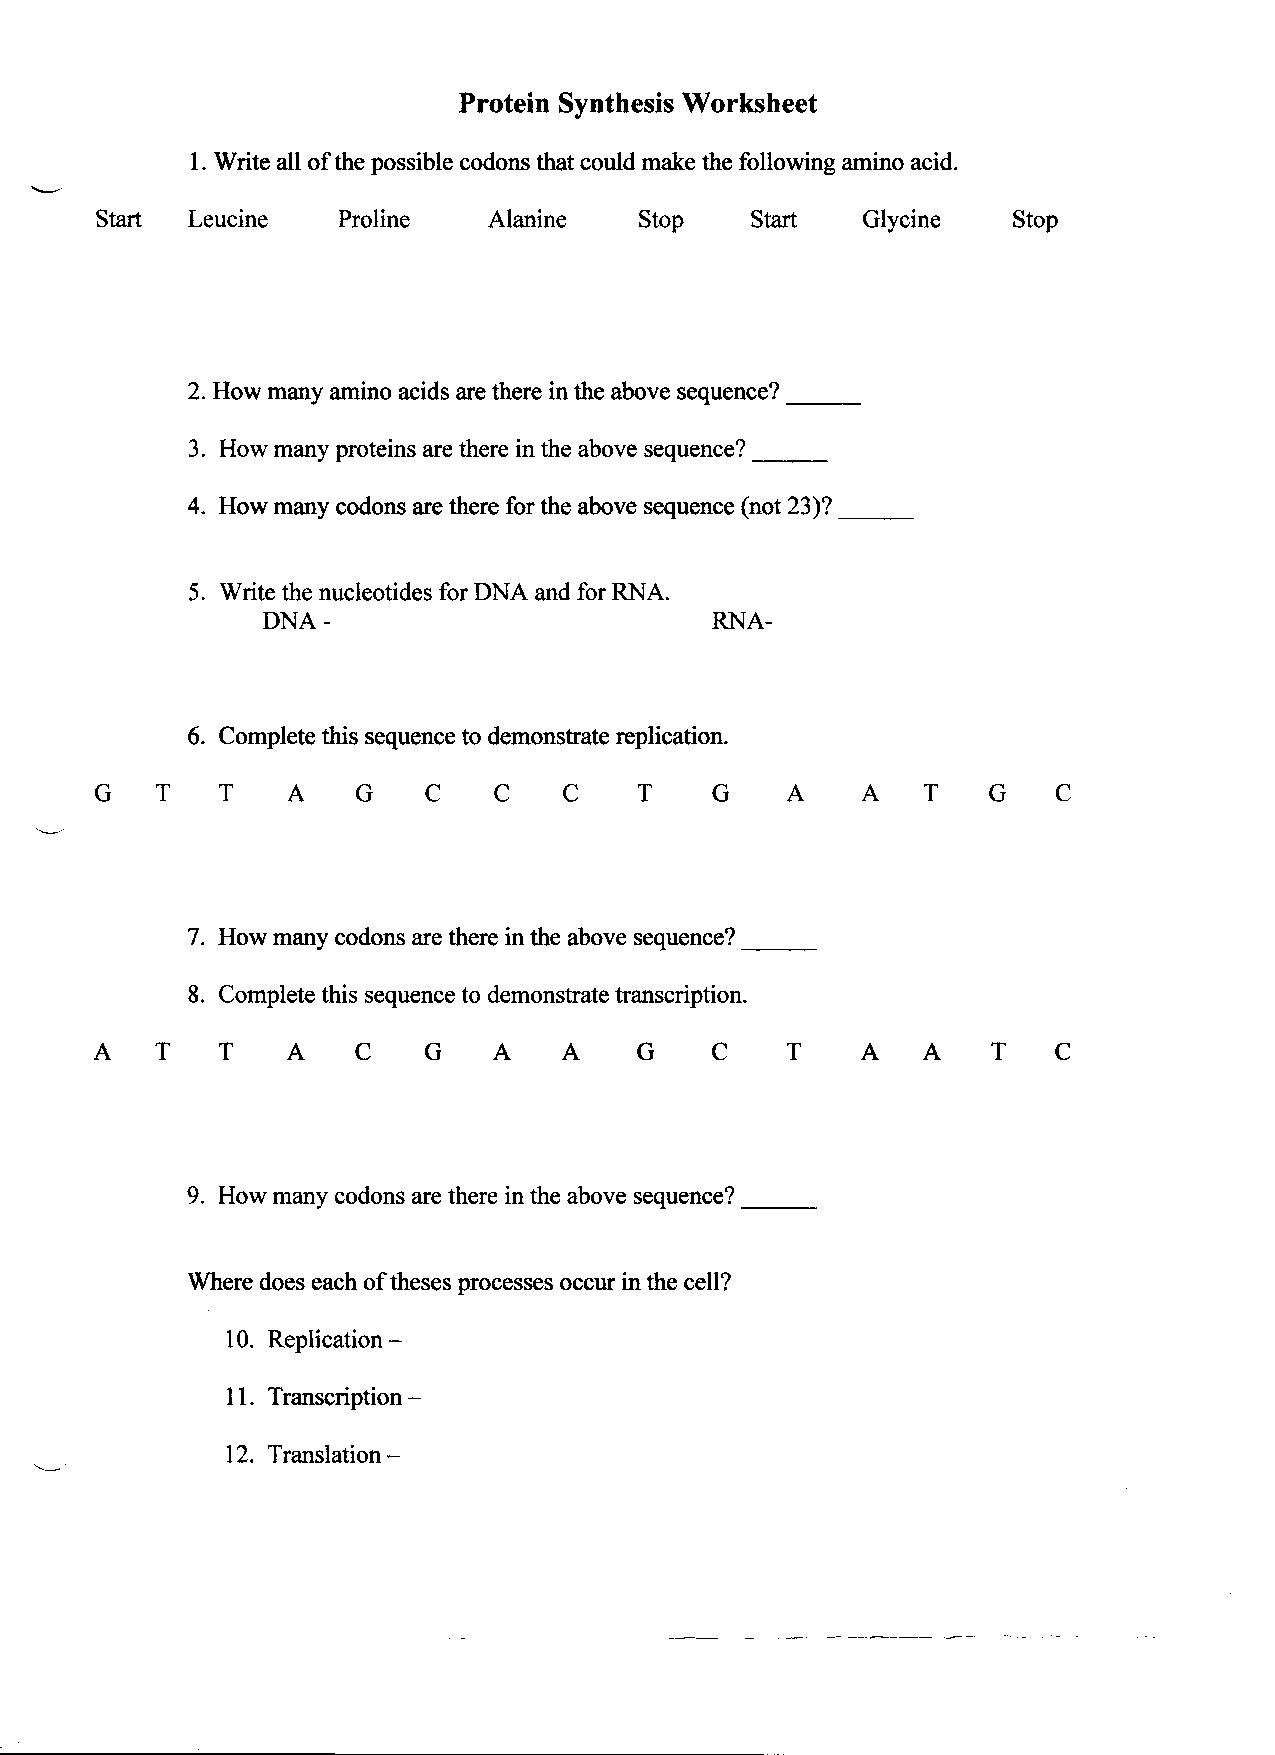 protein-synthesis-worksheet-answer-key